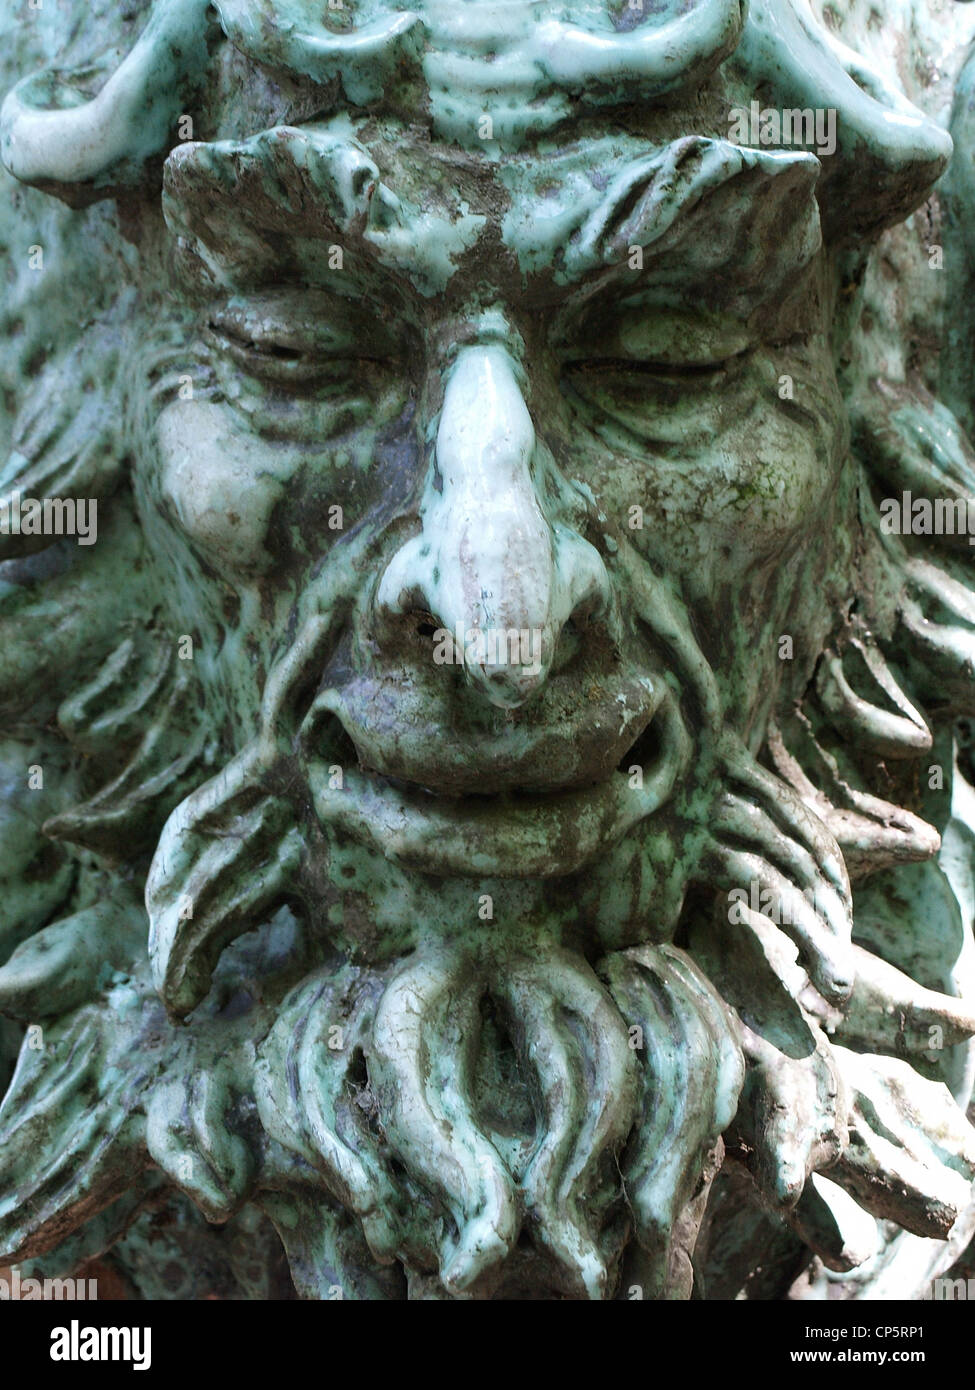 Face sculpture of a scary man Stock Photo